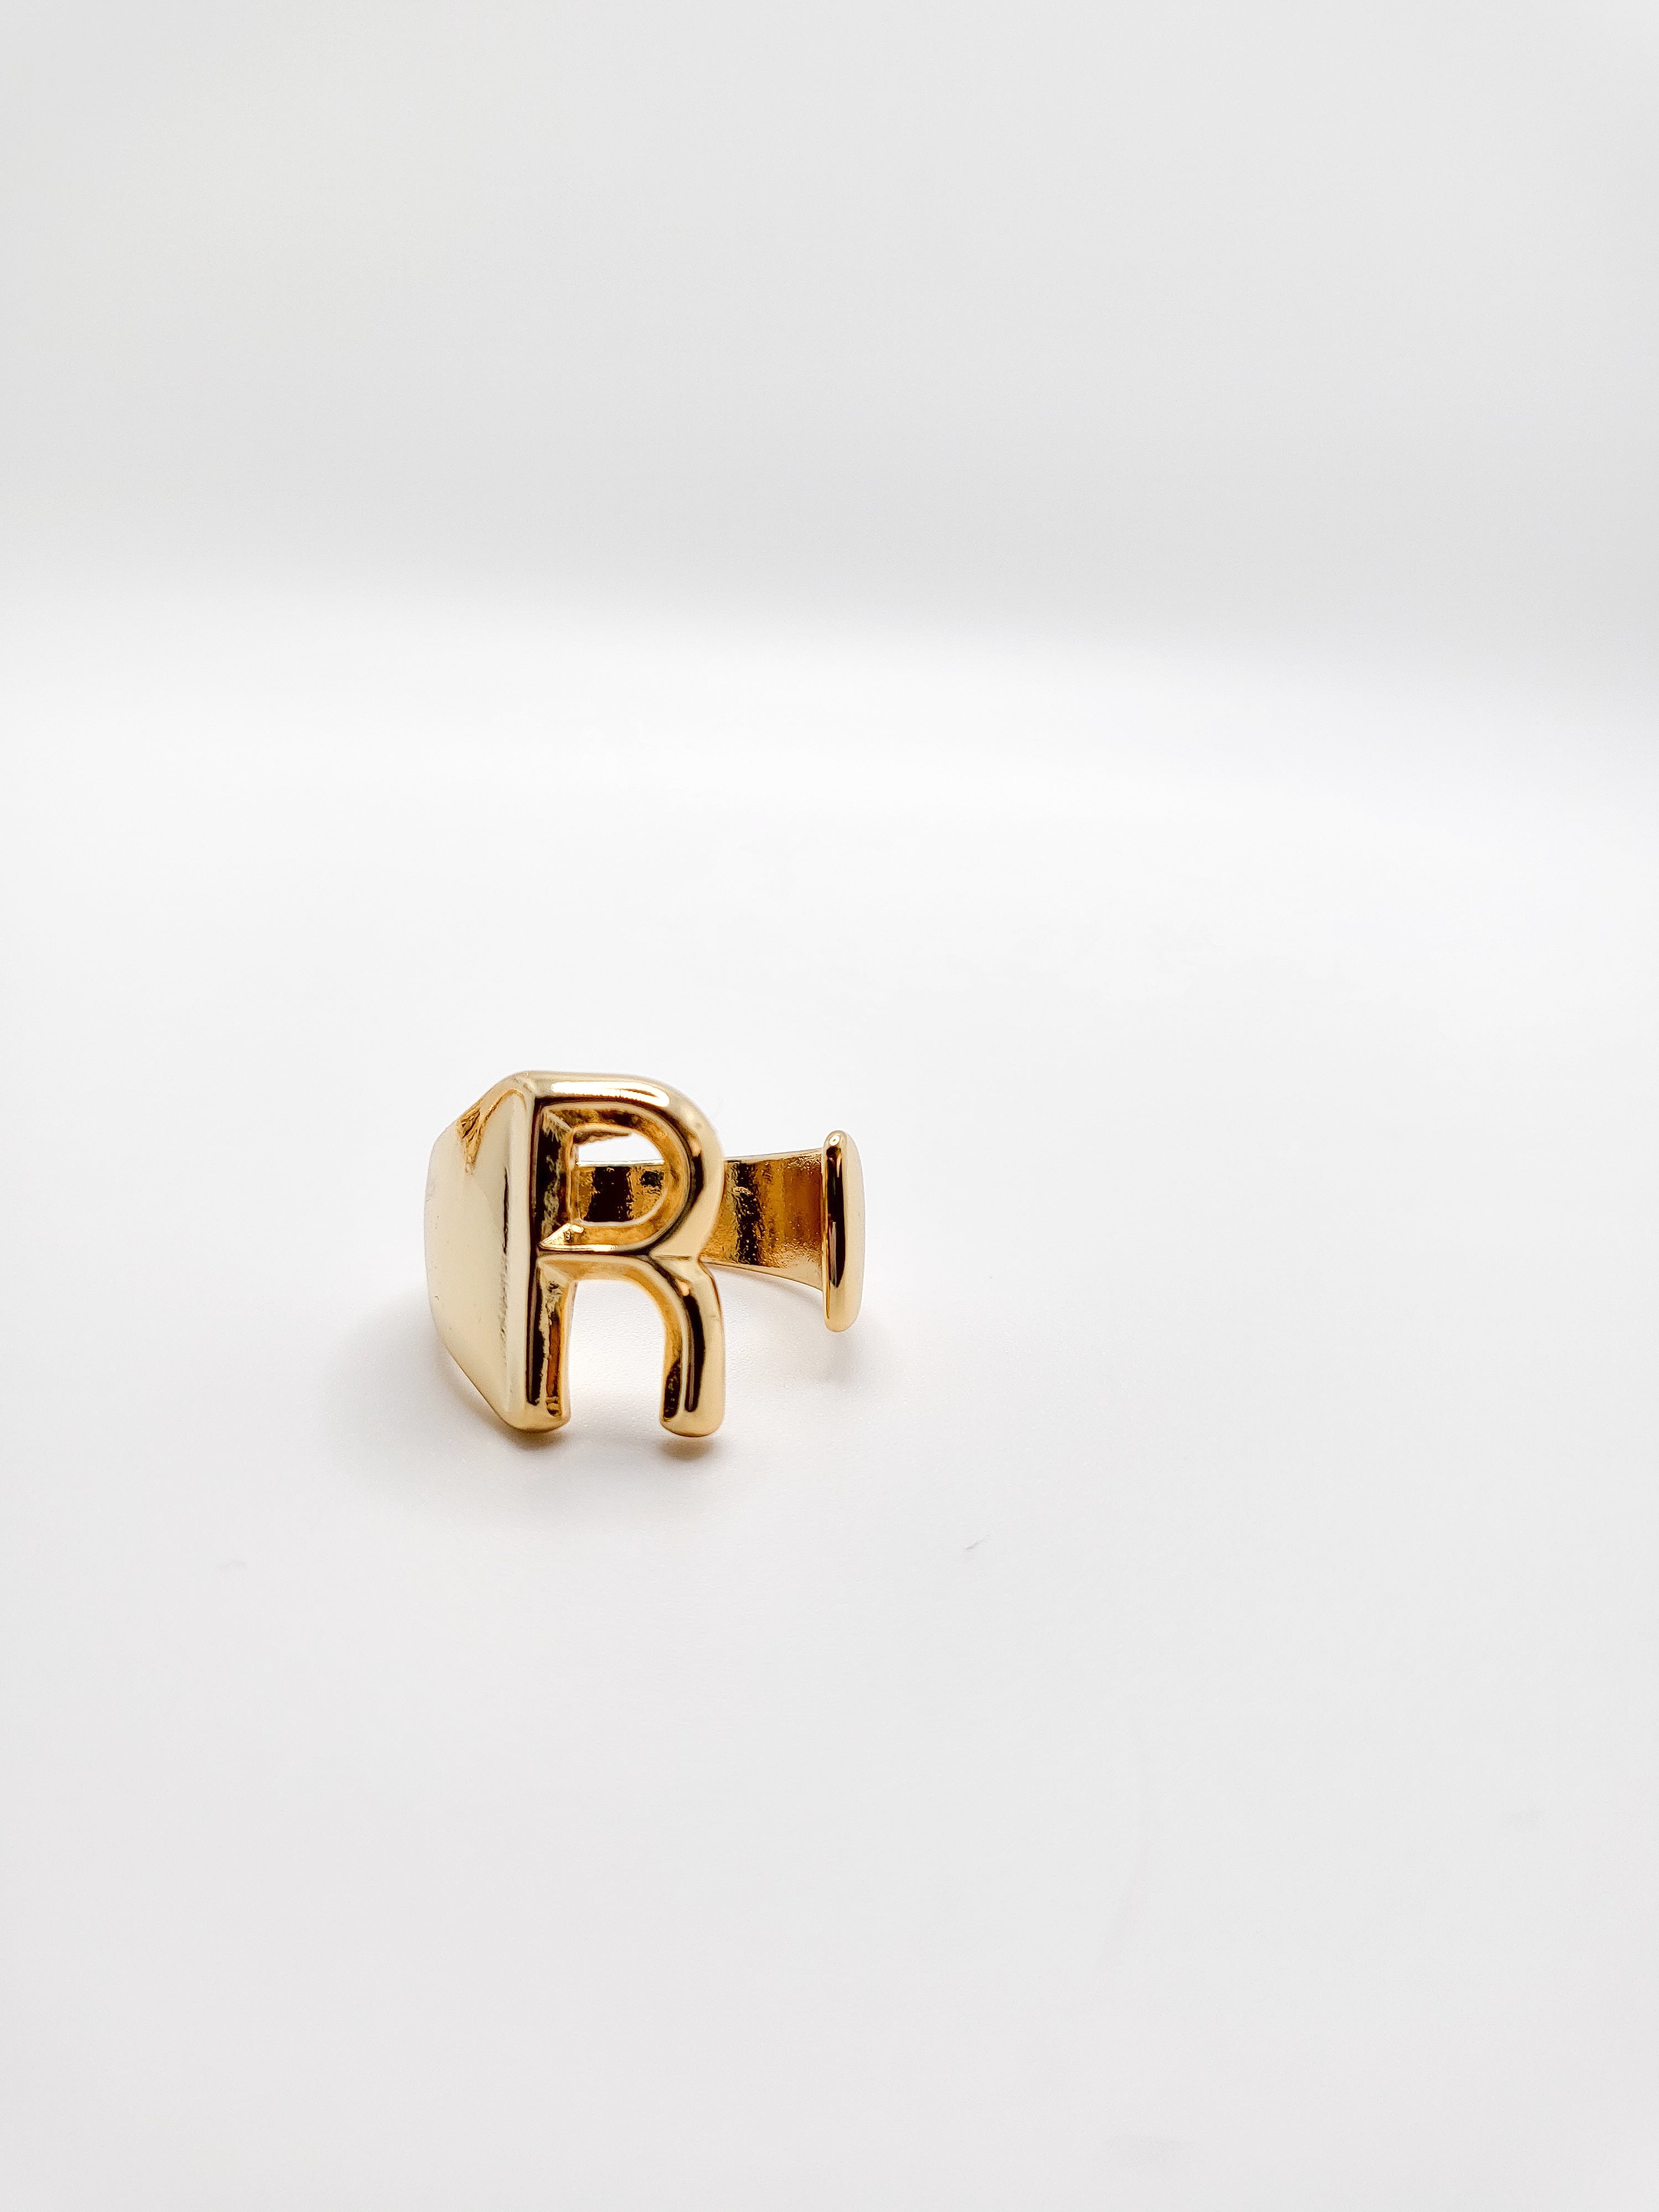 A-Z Letter Gold Color Metal Adjustable Opening Ring Initials Name Alph